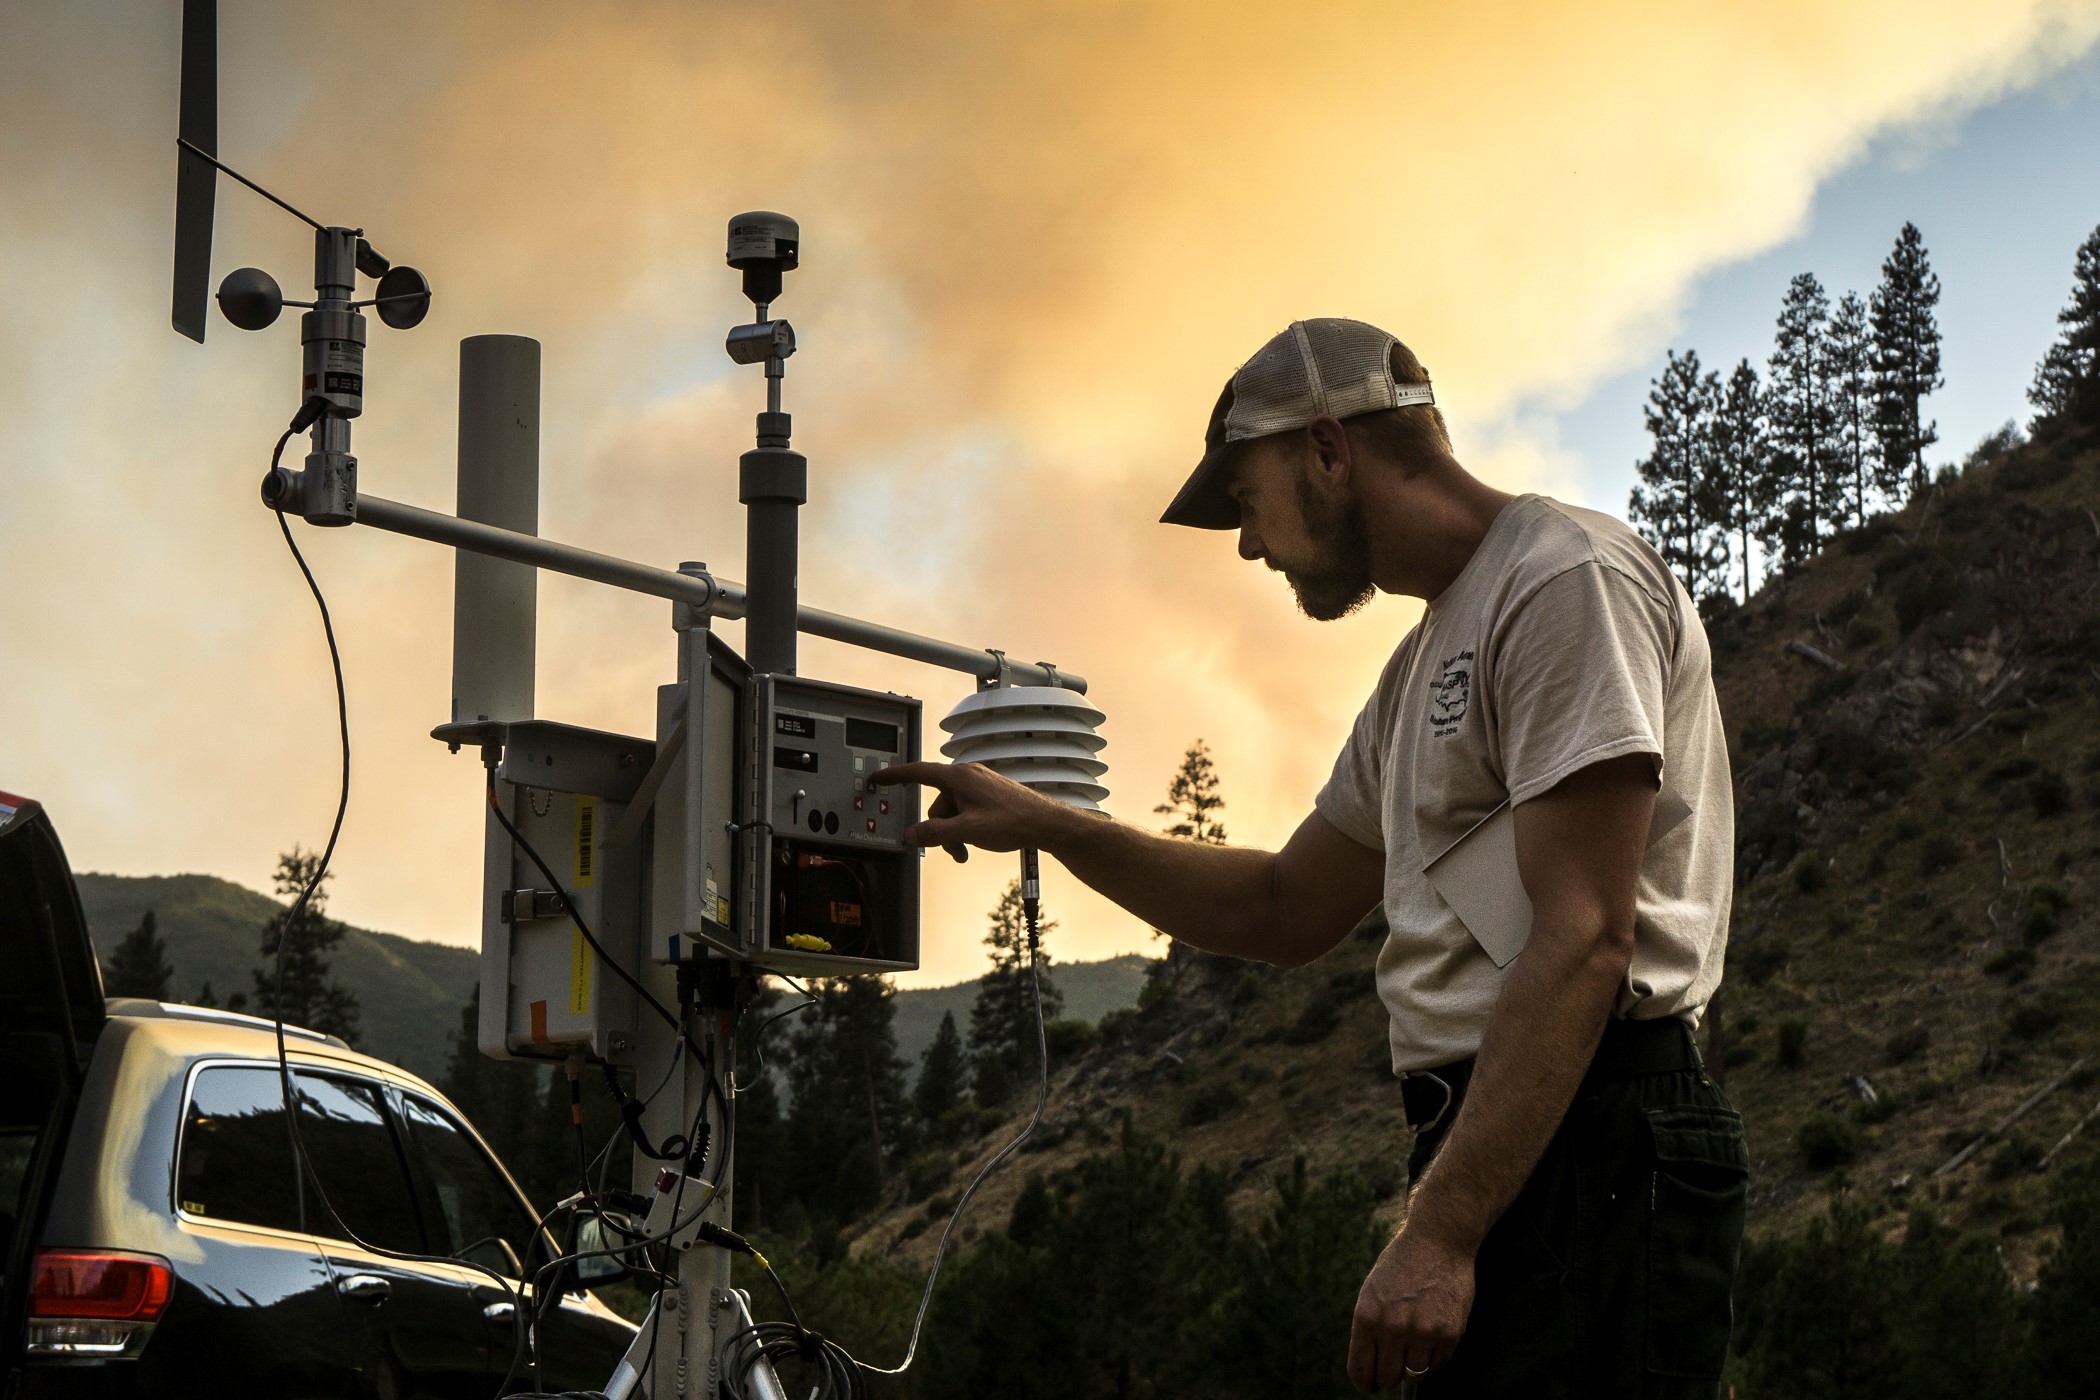 Person installing emergency PM2.5 monitor with smoke plume in the background.